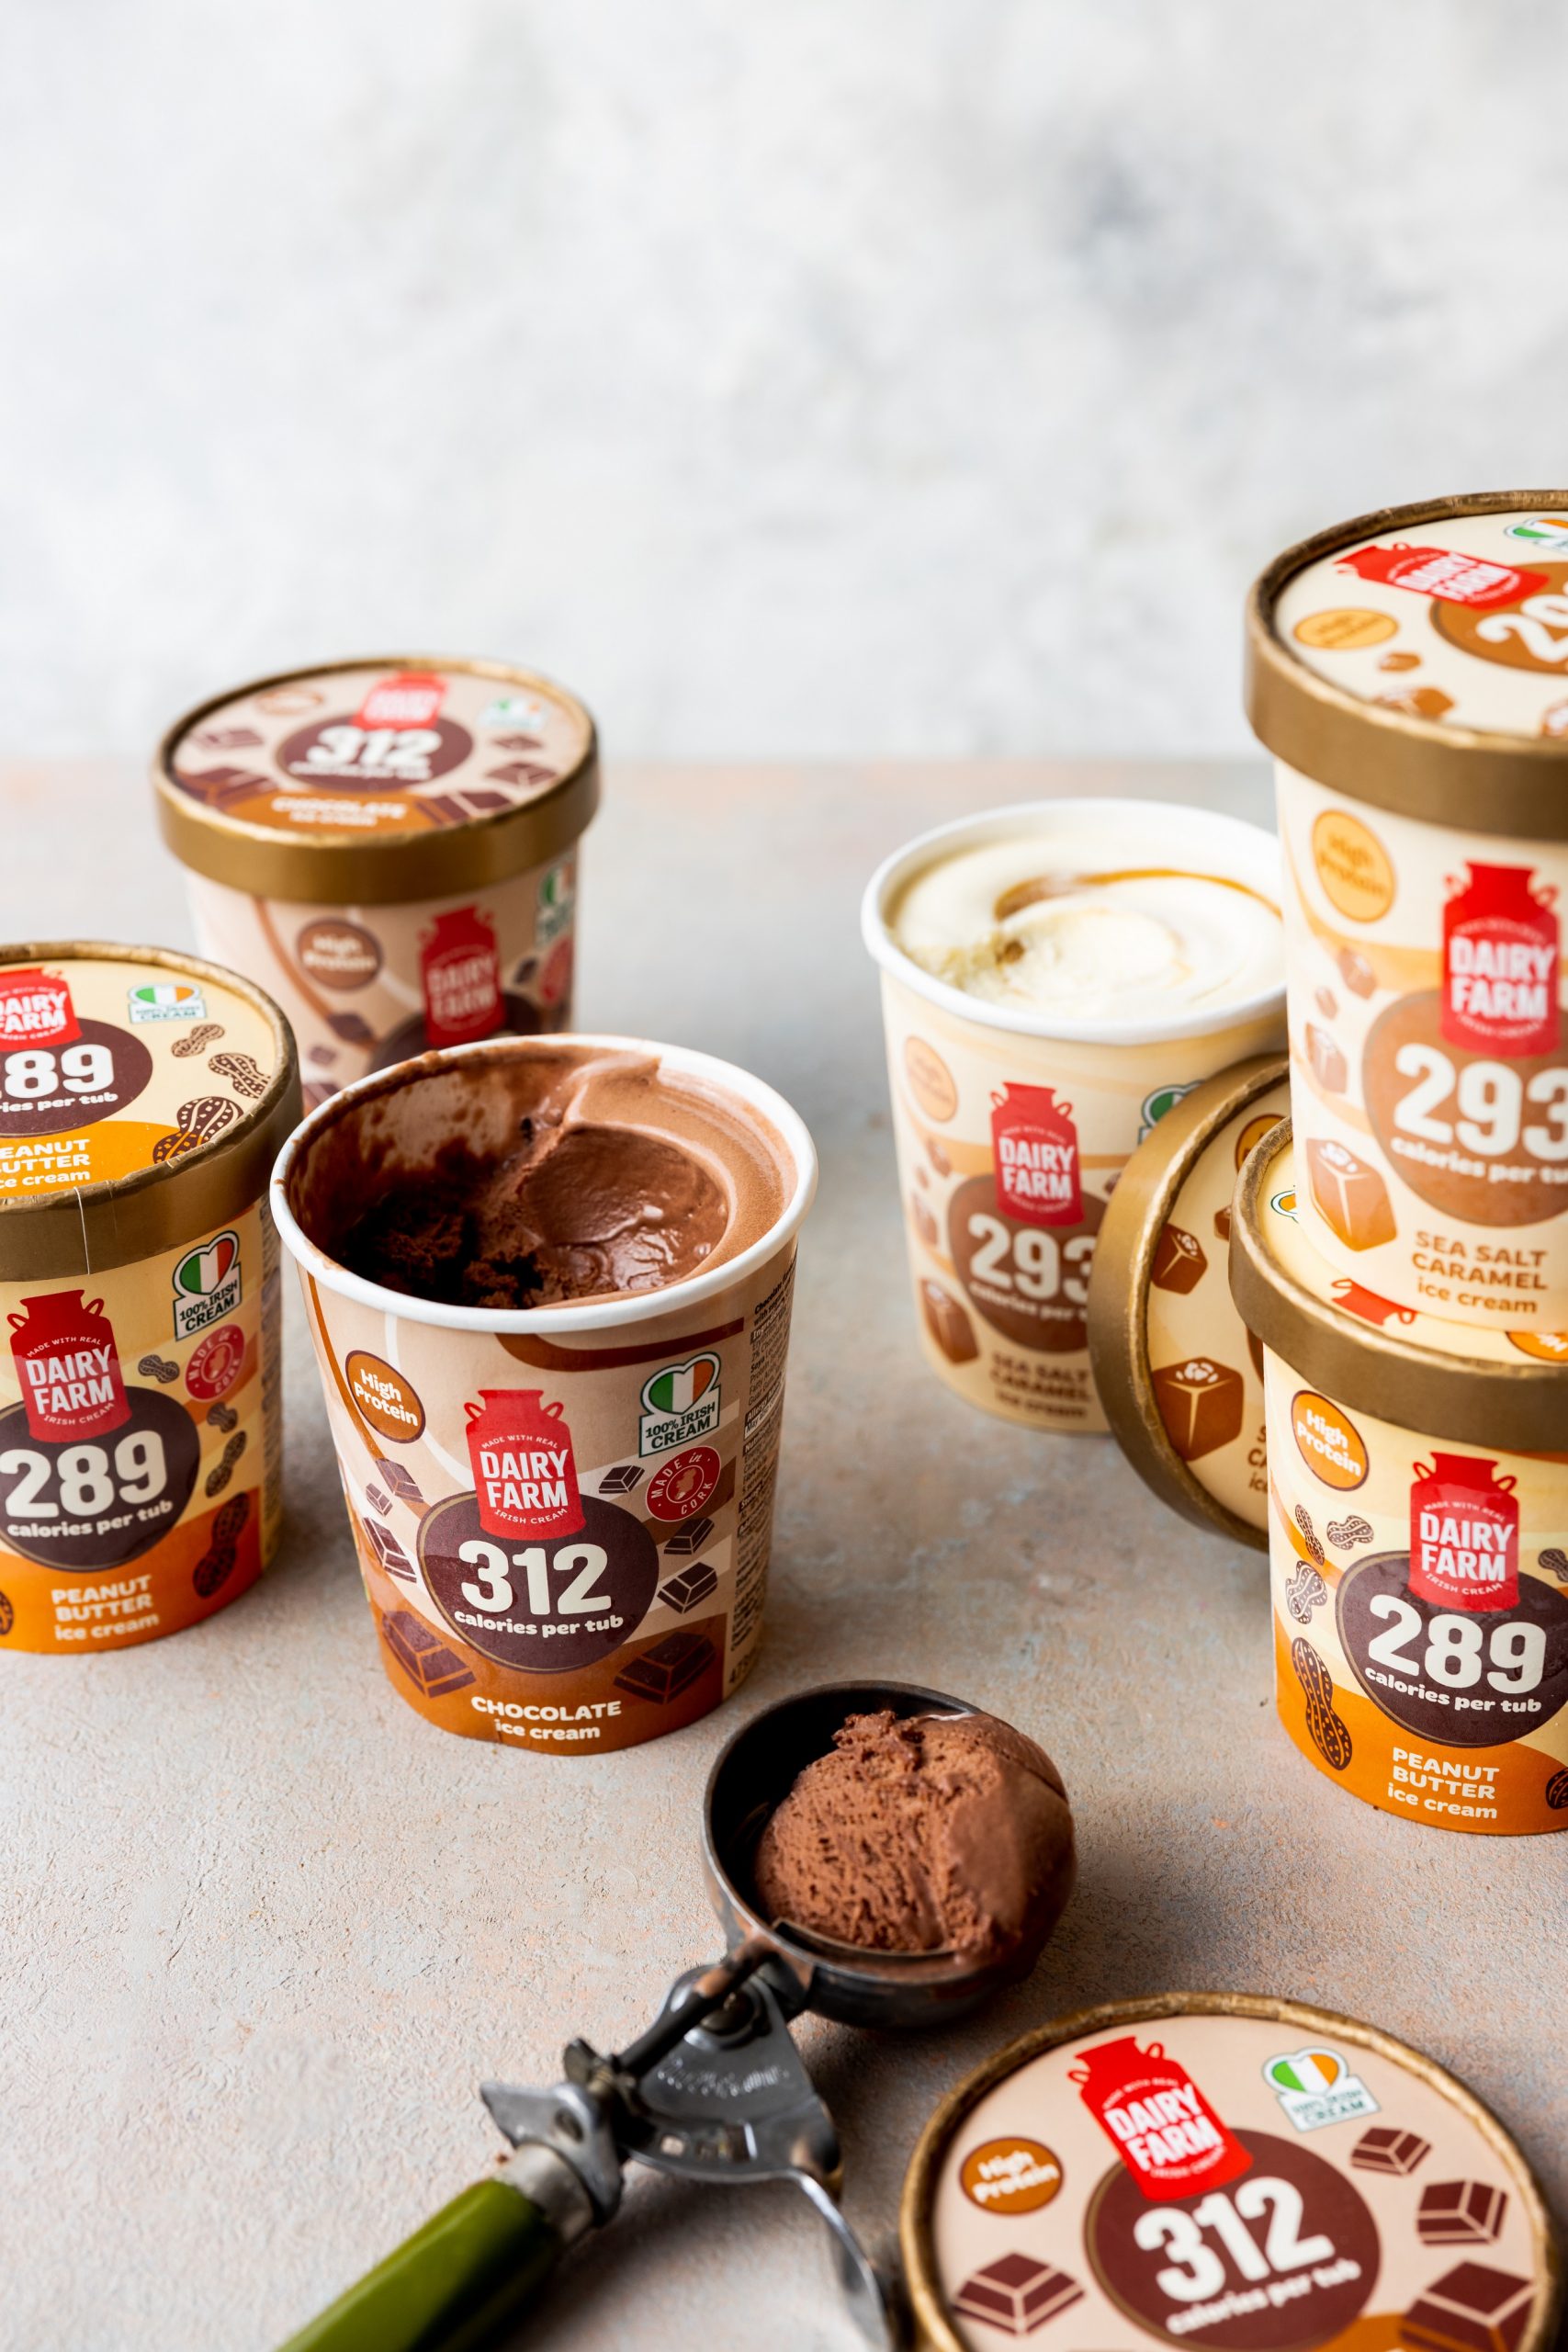 Lidl Northern Ireland launched high protein, low calorie range of ice cream and yogurts